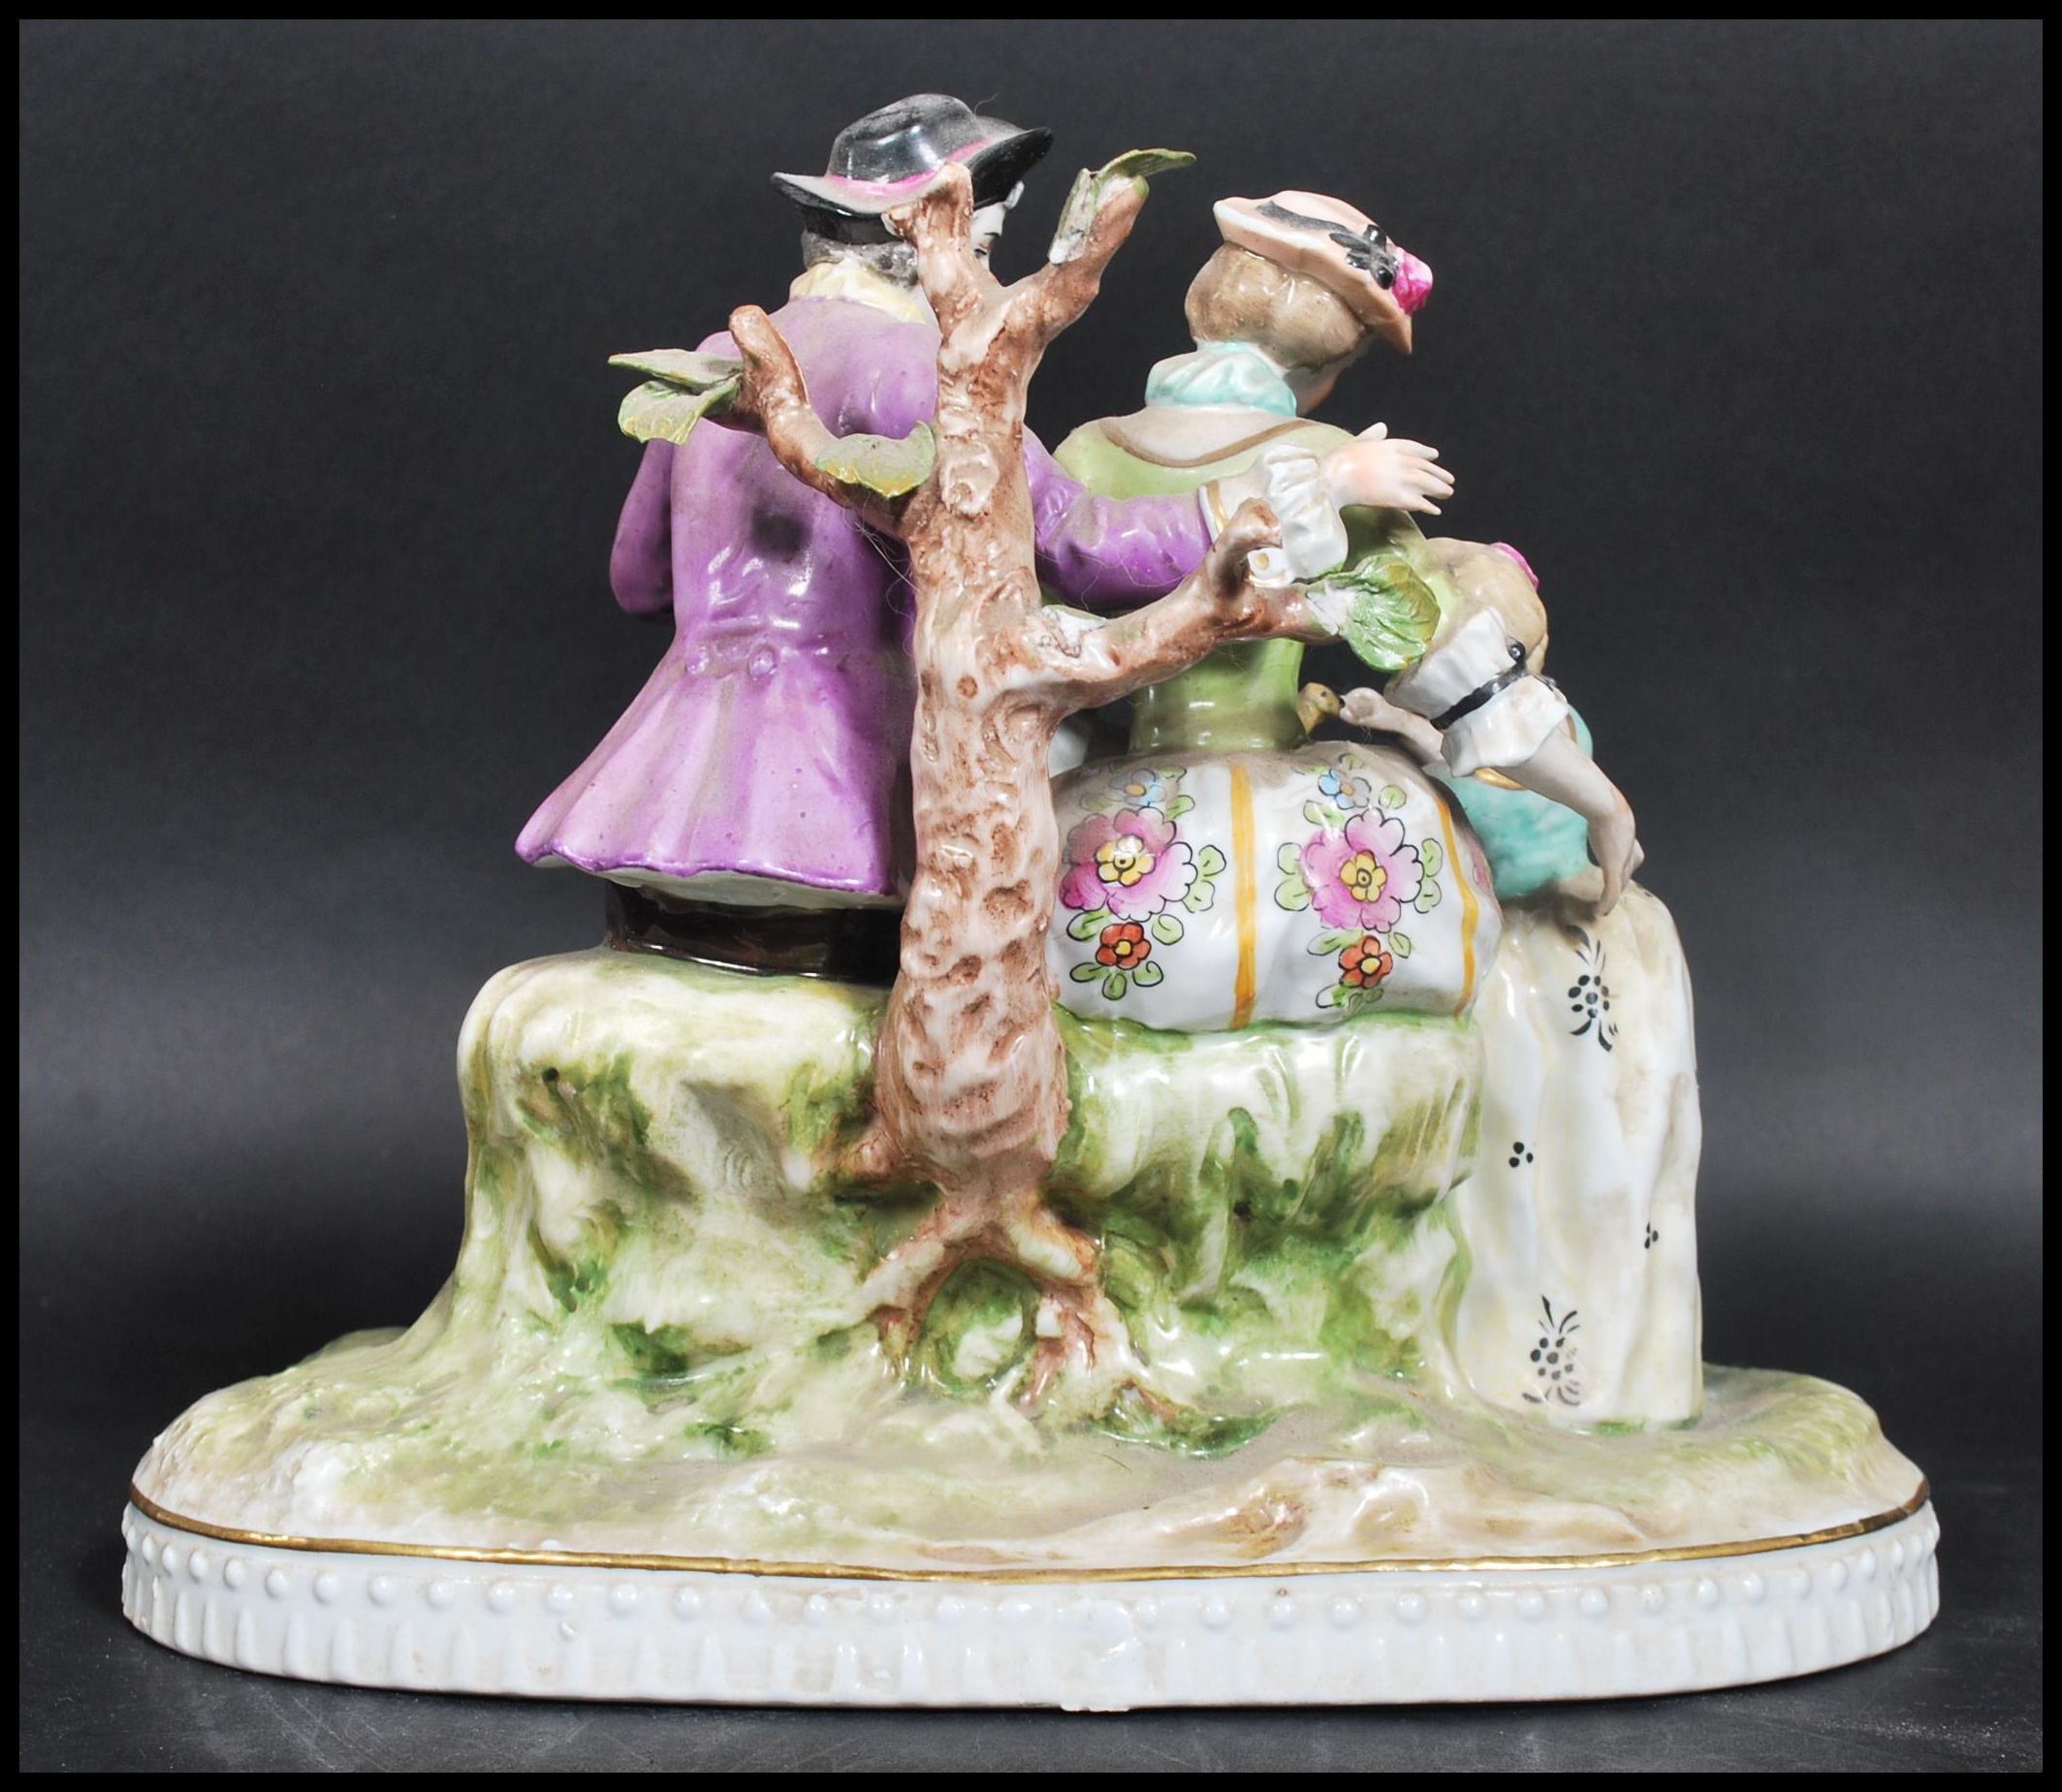 A 19th century Wilhelm Rittirsch German diorama figure group. The figurine depicting a family with - Image 5 of 9